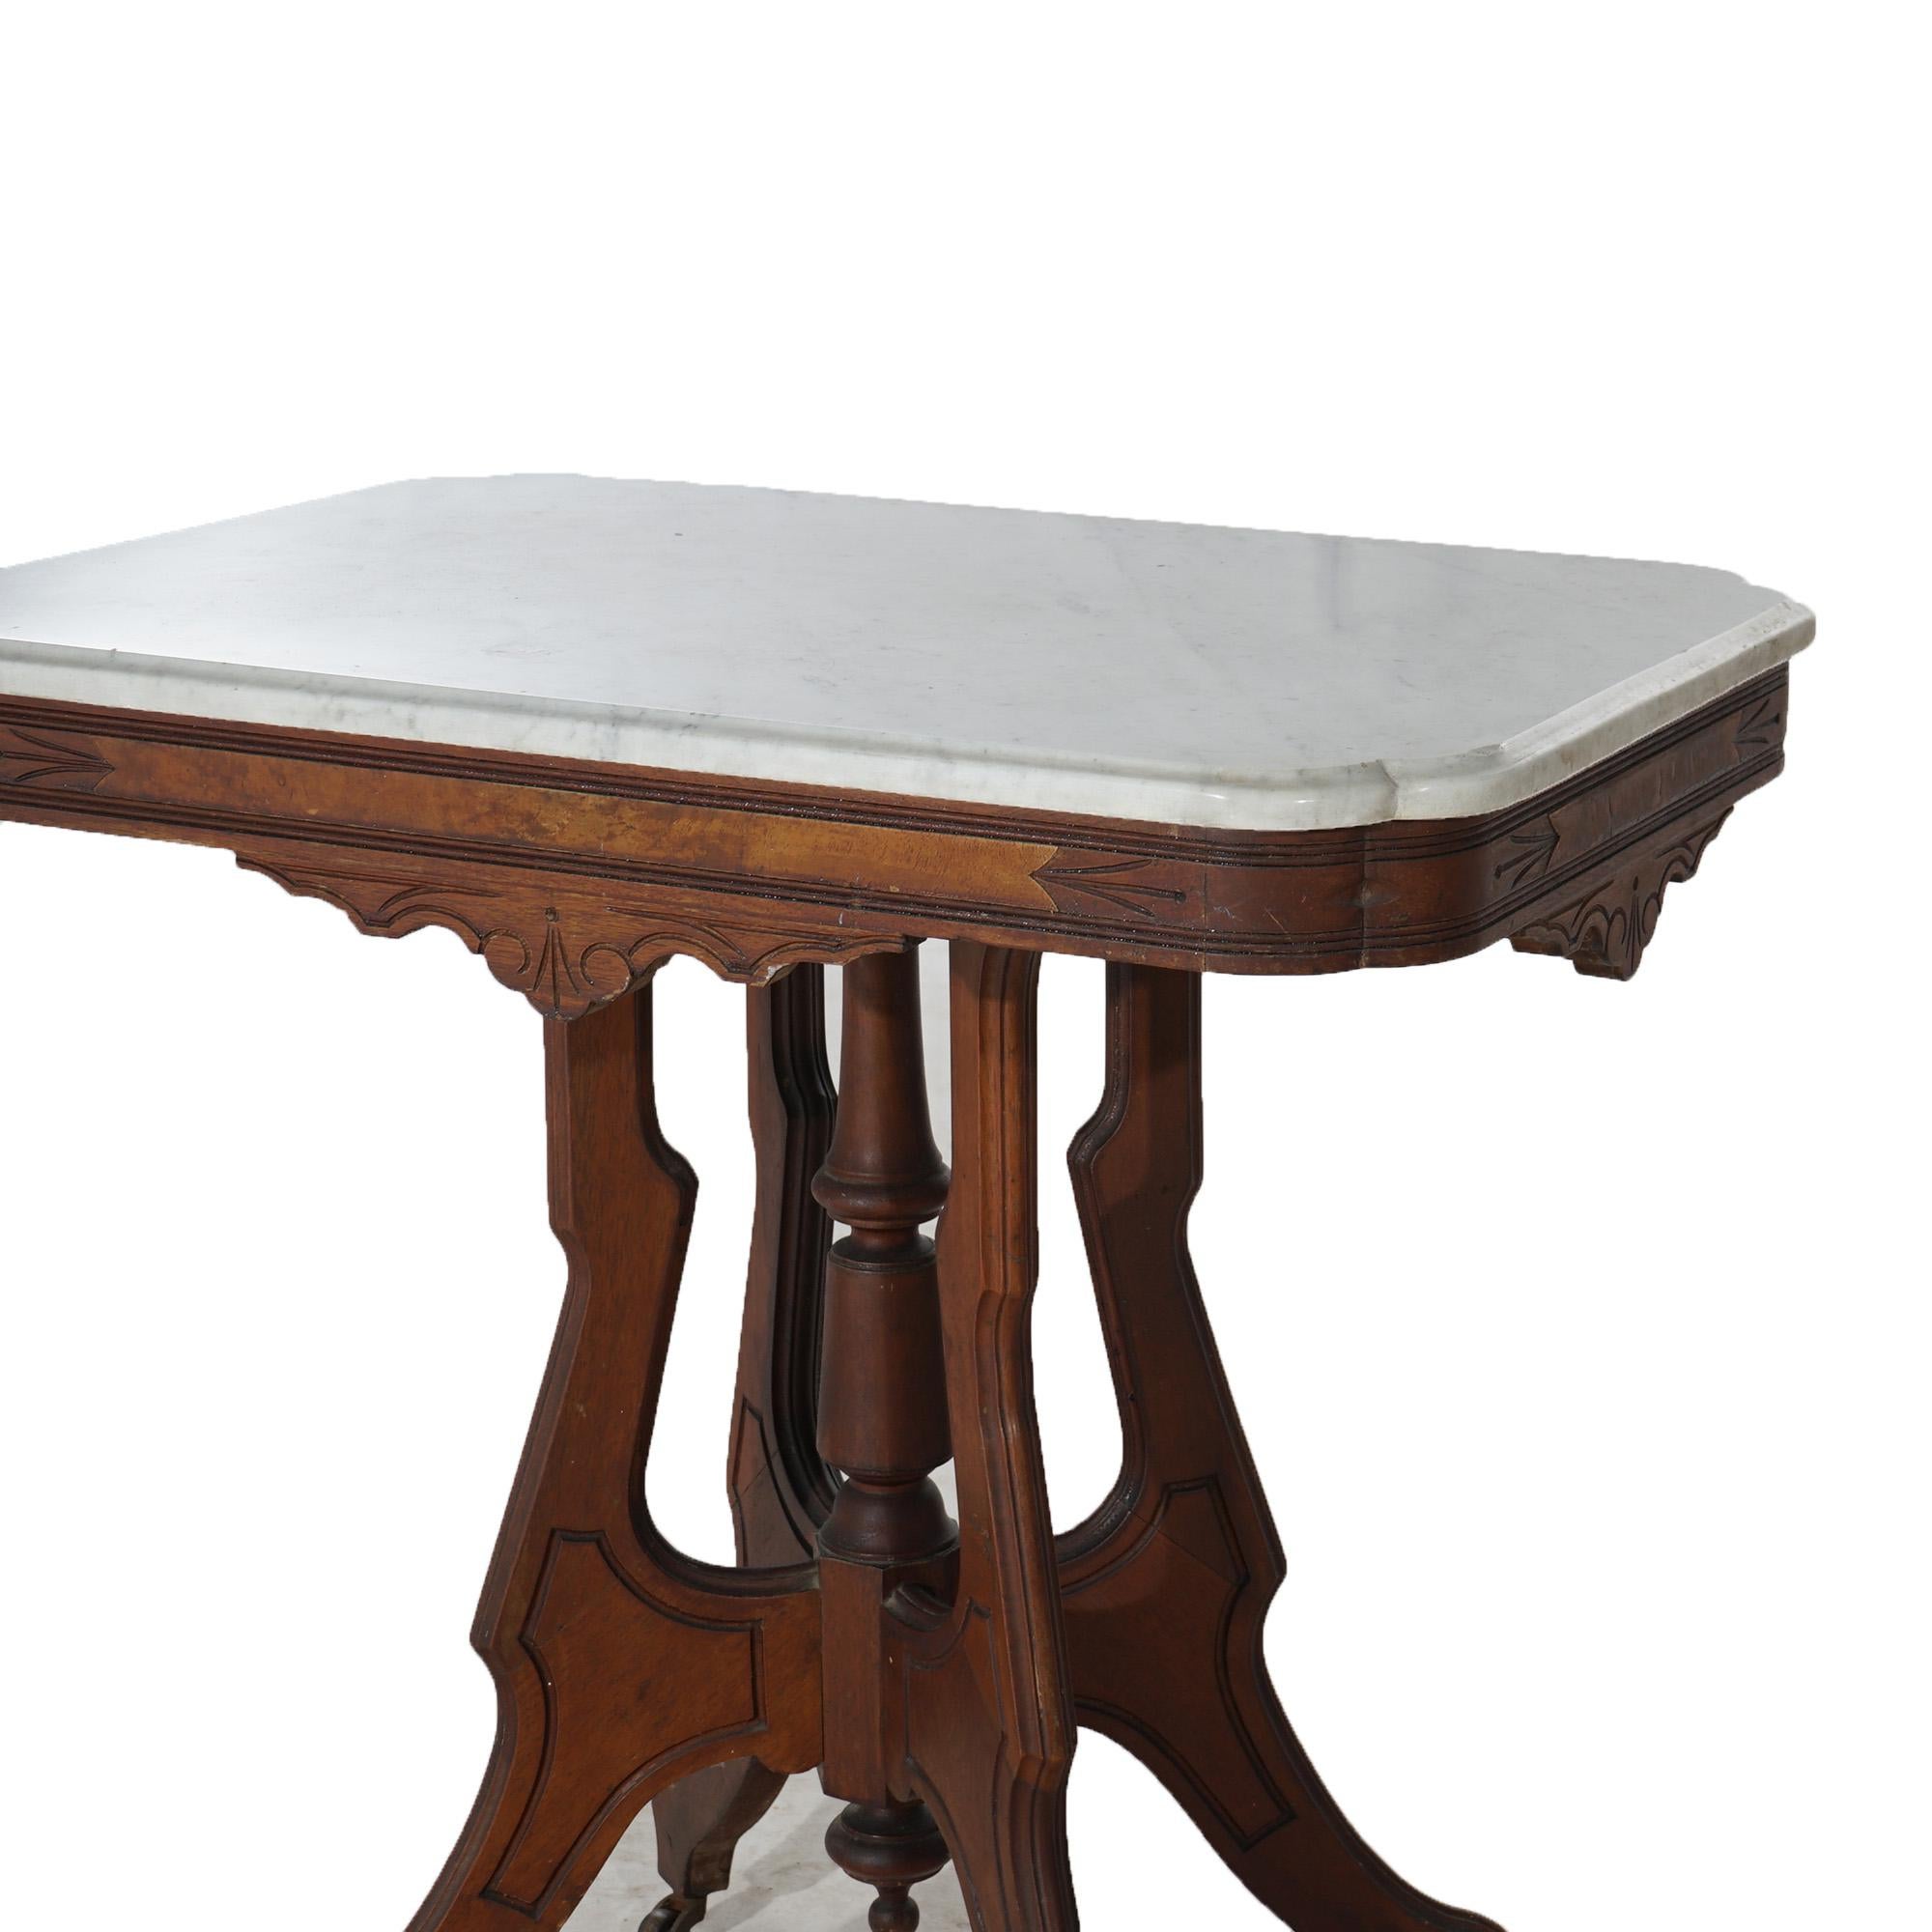 19th Century Antique Eastlake Victorian Carved Walnut, Burl & Marble Parlor Table C1890 For Sale